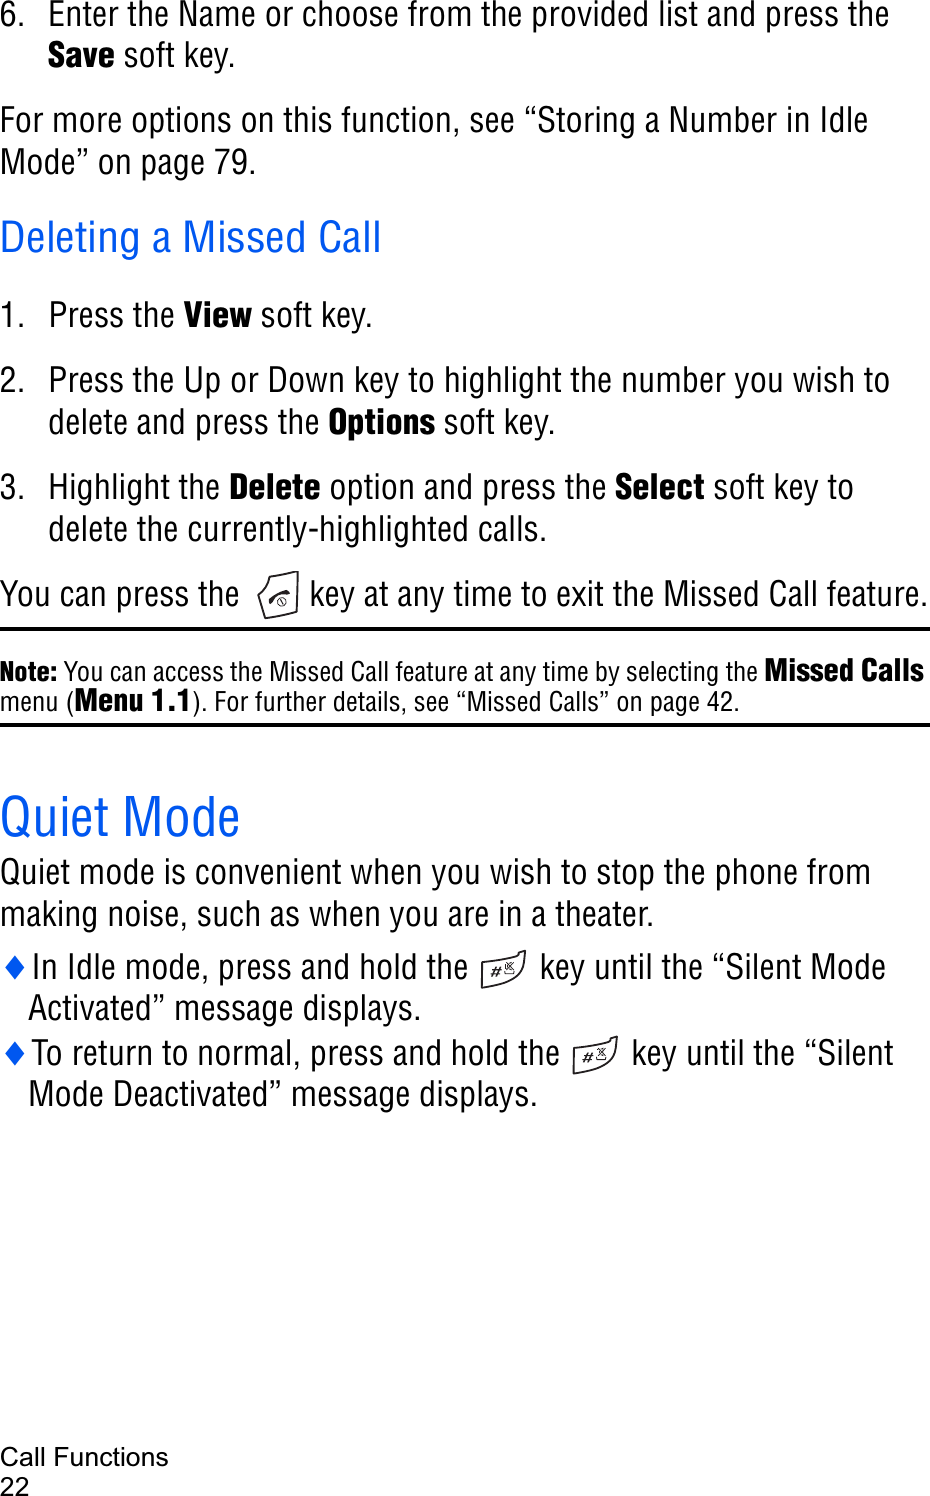 Call Functions226. Enter the Name or choose from the provided list and press theSave soft key.For more options on this function, see “Storing a Number in Idle Mode” on page 79.Deleting a Missed Call1. Press the View soft key.2. Press the Up or Down key to highlight the number you wish to delete and press the Options soft key.3. Highlight the Delete option and press the Select soft key to delete the currently-highlighted calls.You can press the   key at any time to exit the Missed Call feature.Note: You can access the Missed Call feature at any time by selecting the Missed Callsmenu (Menu 1.1). For further details, see “Missed Calls” on page 42.Quiet ModeQuiet mode is convenient when you wish to stop the phone from making noise, such as when you are in a theater.iIn Idle mode, press and hold the   key until the “Silent Mode Activated” message displays.iTo return to normal, press and hold the   key until the “Silent Mode Deactivated” message displays.